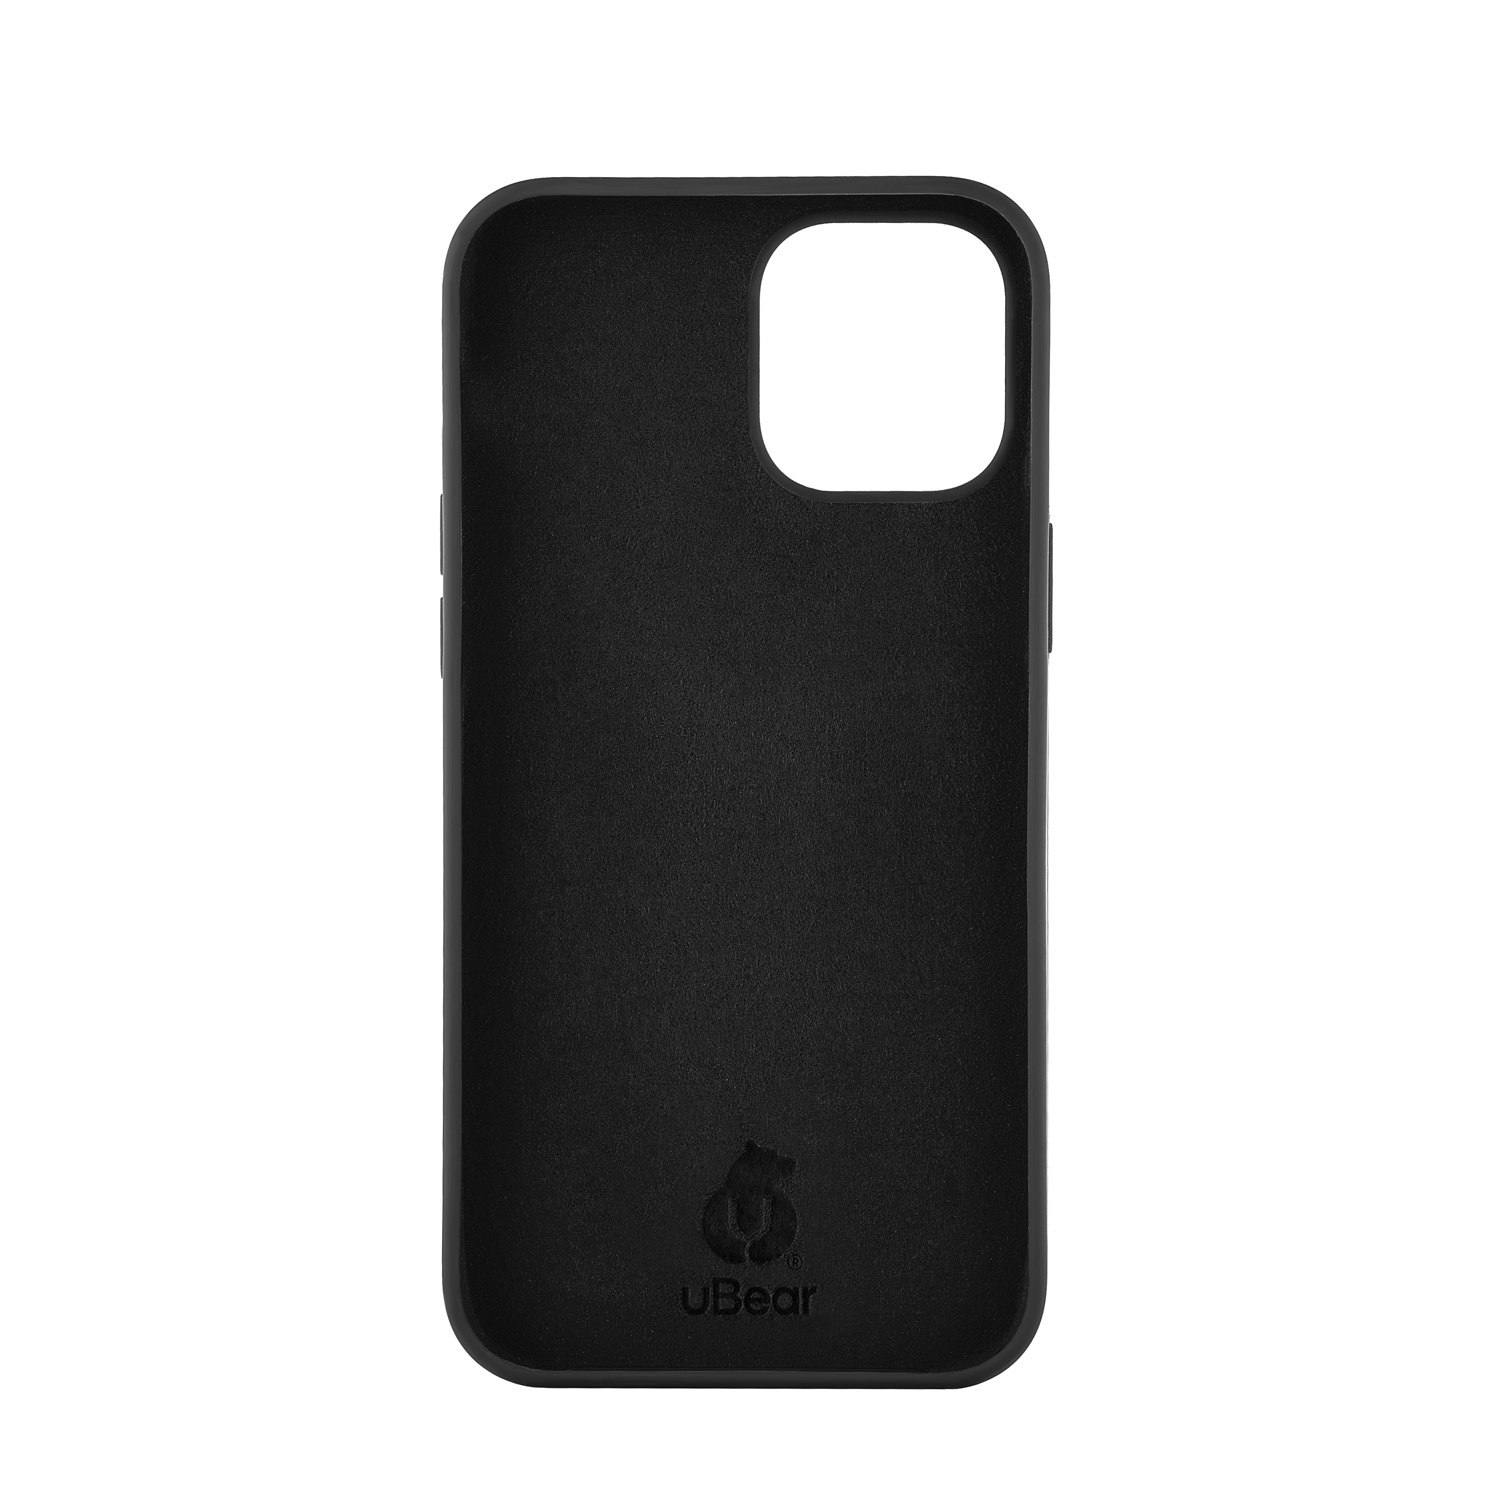 Touch Case  for iPhone 12/12 Pro (Liquid Silicone), чёрный